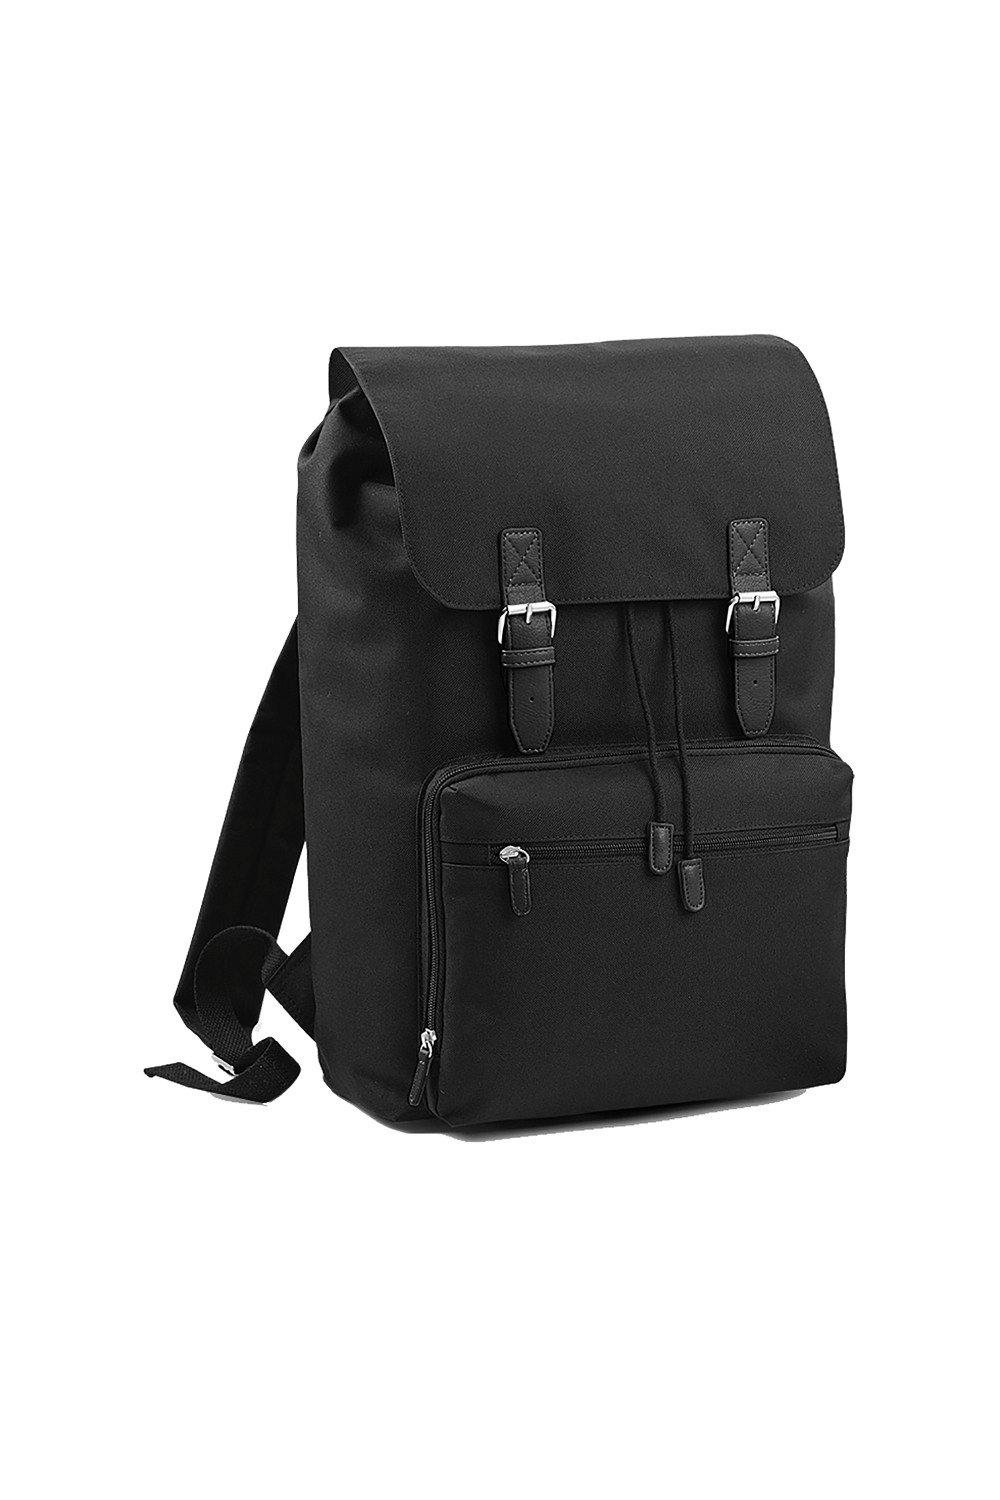 Heritage Laptop Backpack Bag (Up To 17inch Laptop) Pack of 2